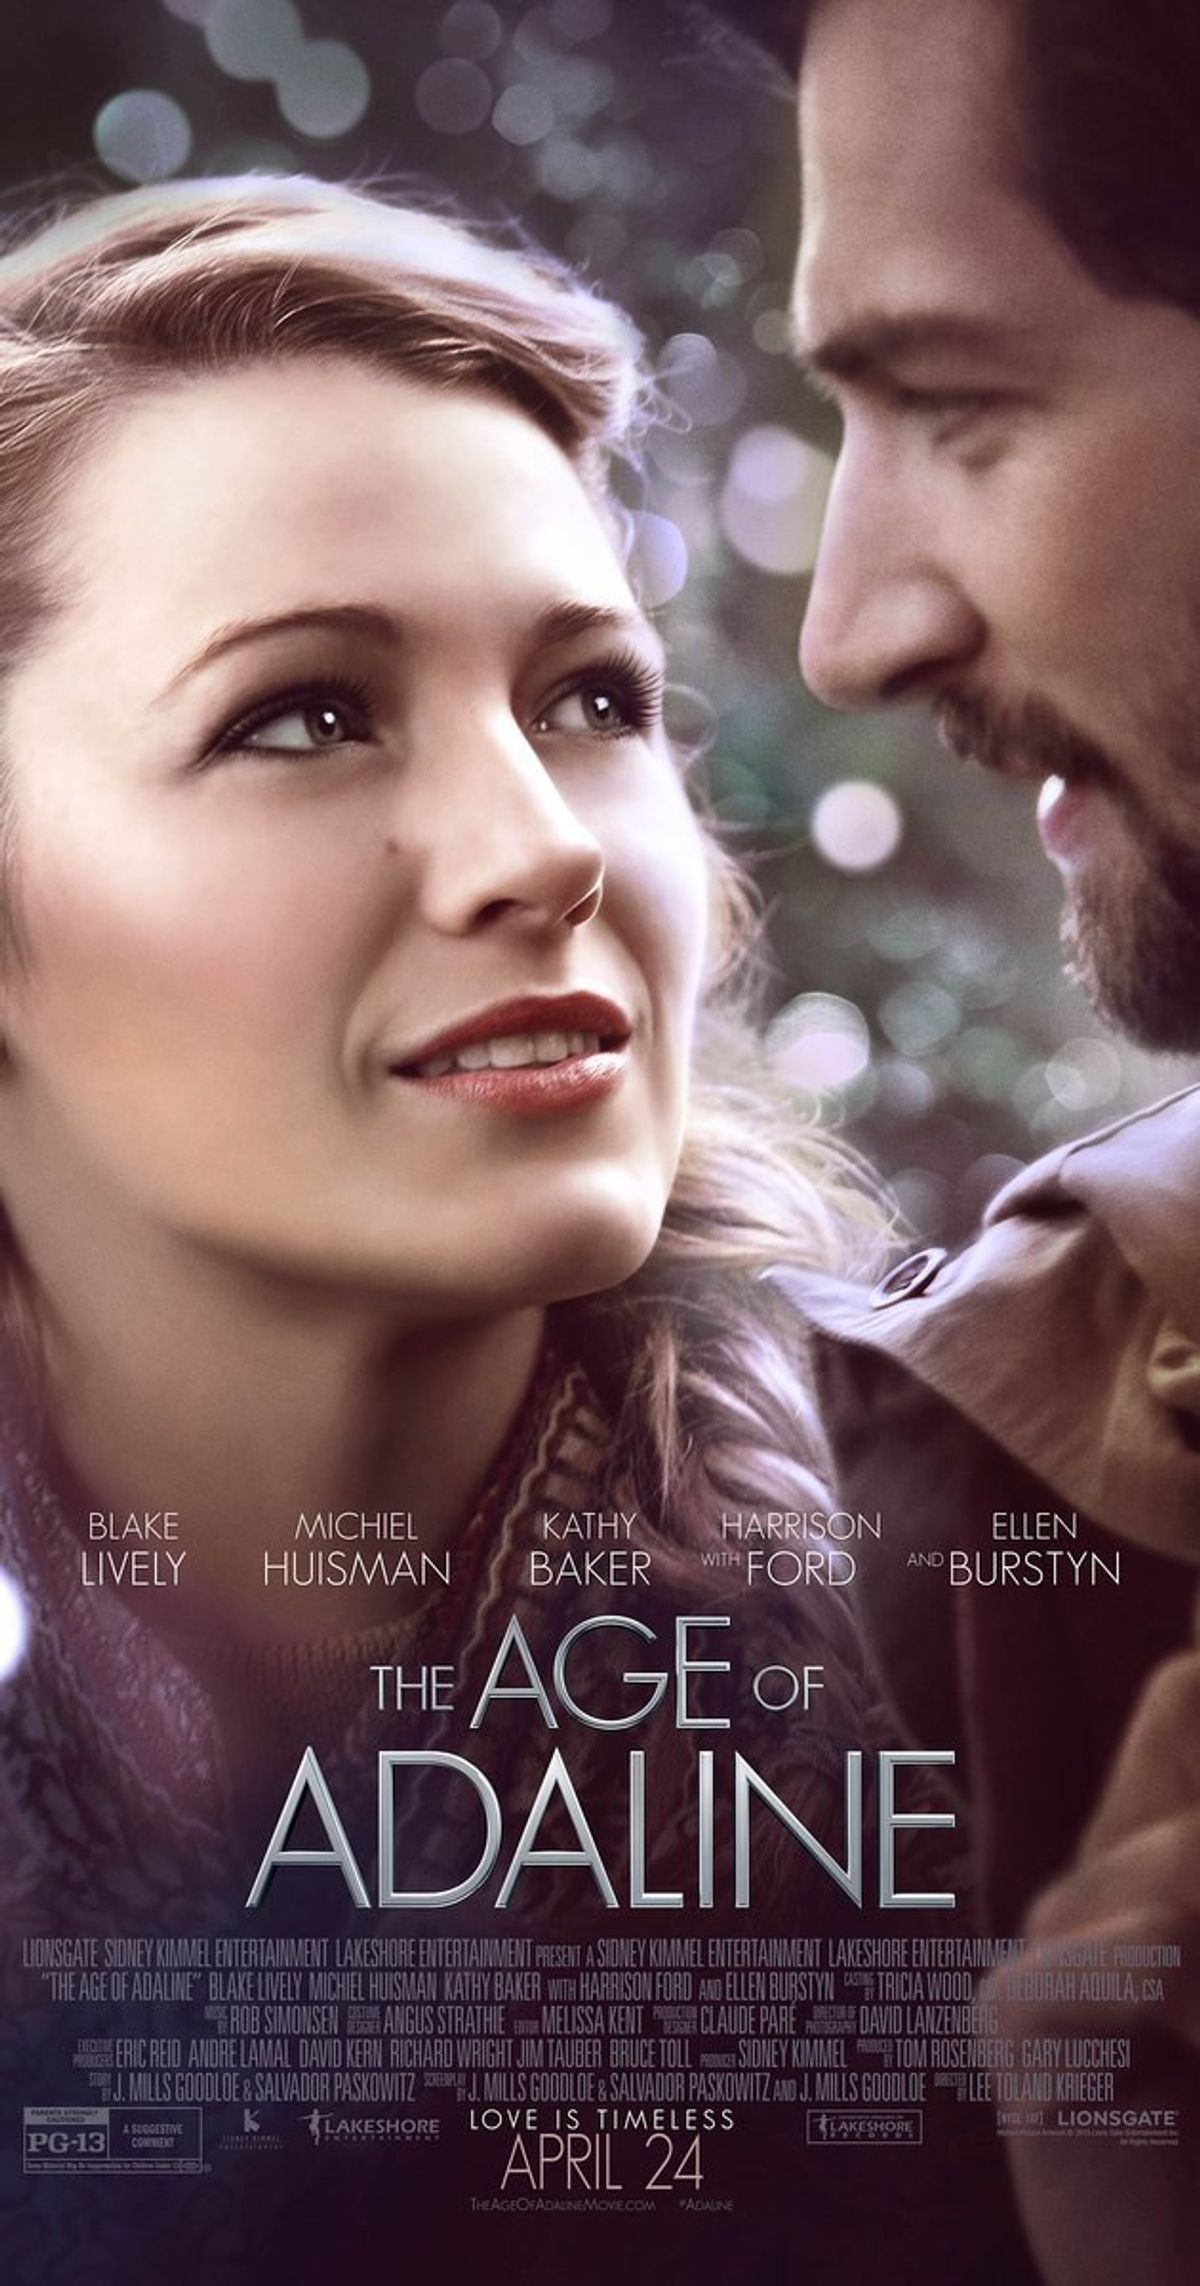 "The Age of Adaline:" An Analysis